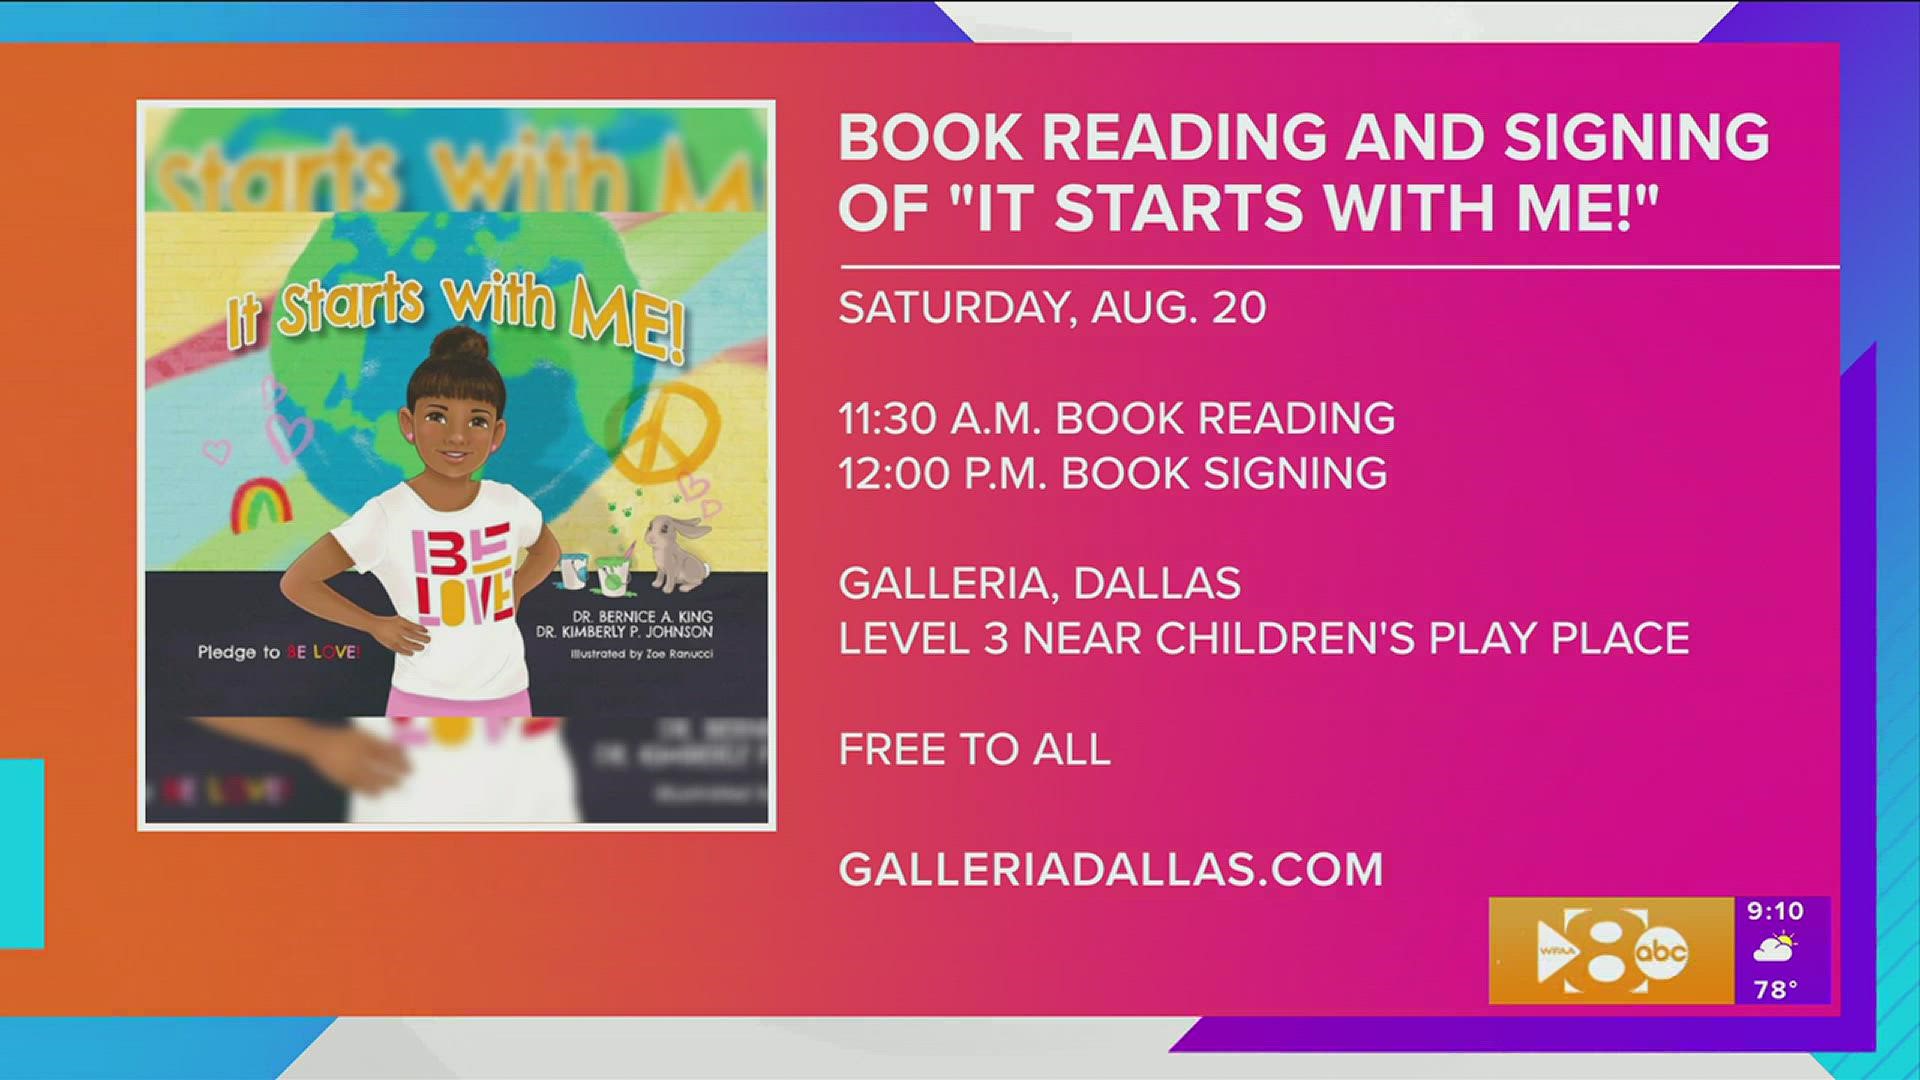 Join Dr. Bernice A. King this Saturday at the Galleria in Dallas for a book reading and signing of "It Starts with Me."